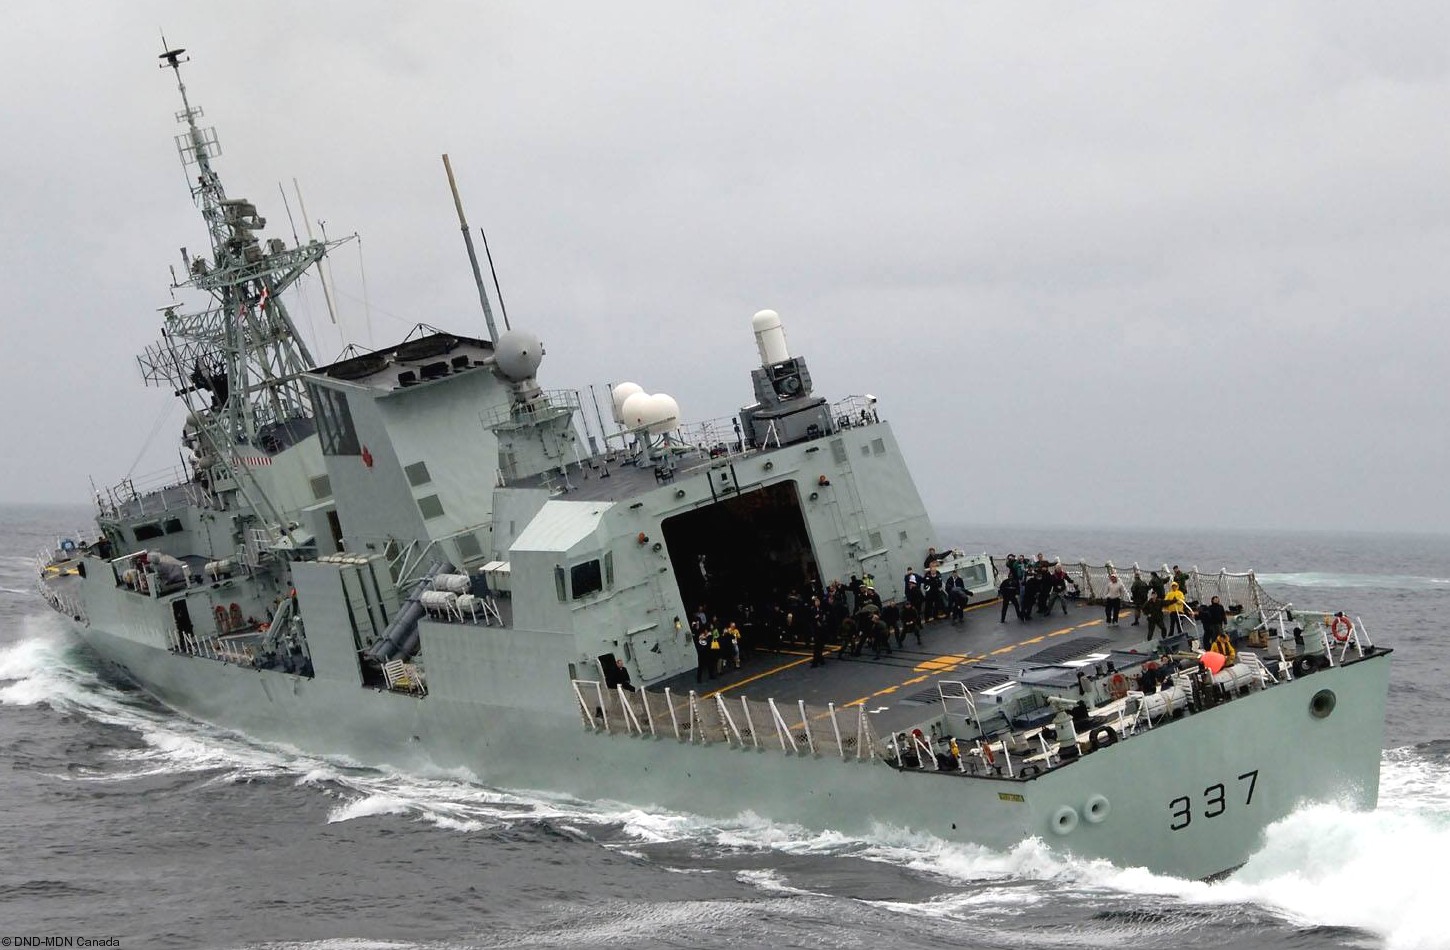 ffh-337 hmcs fredericton halifax class helicopter patrol frigate ncsm royal canadian navy 21